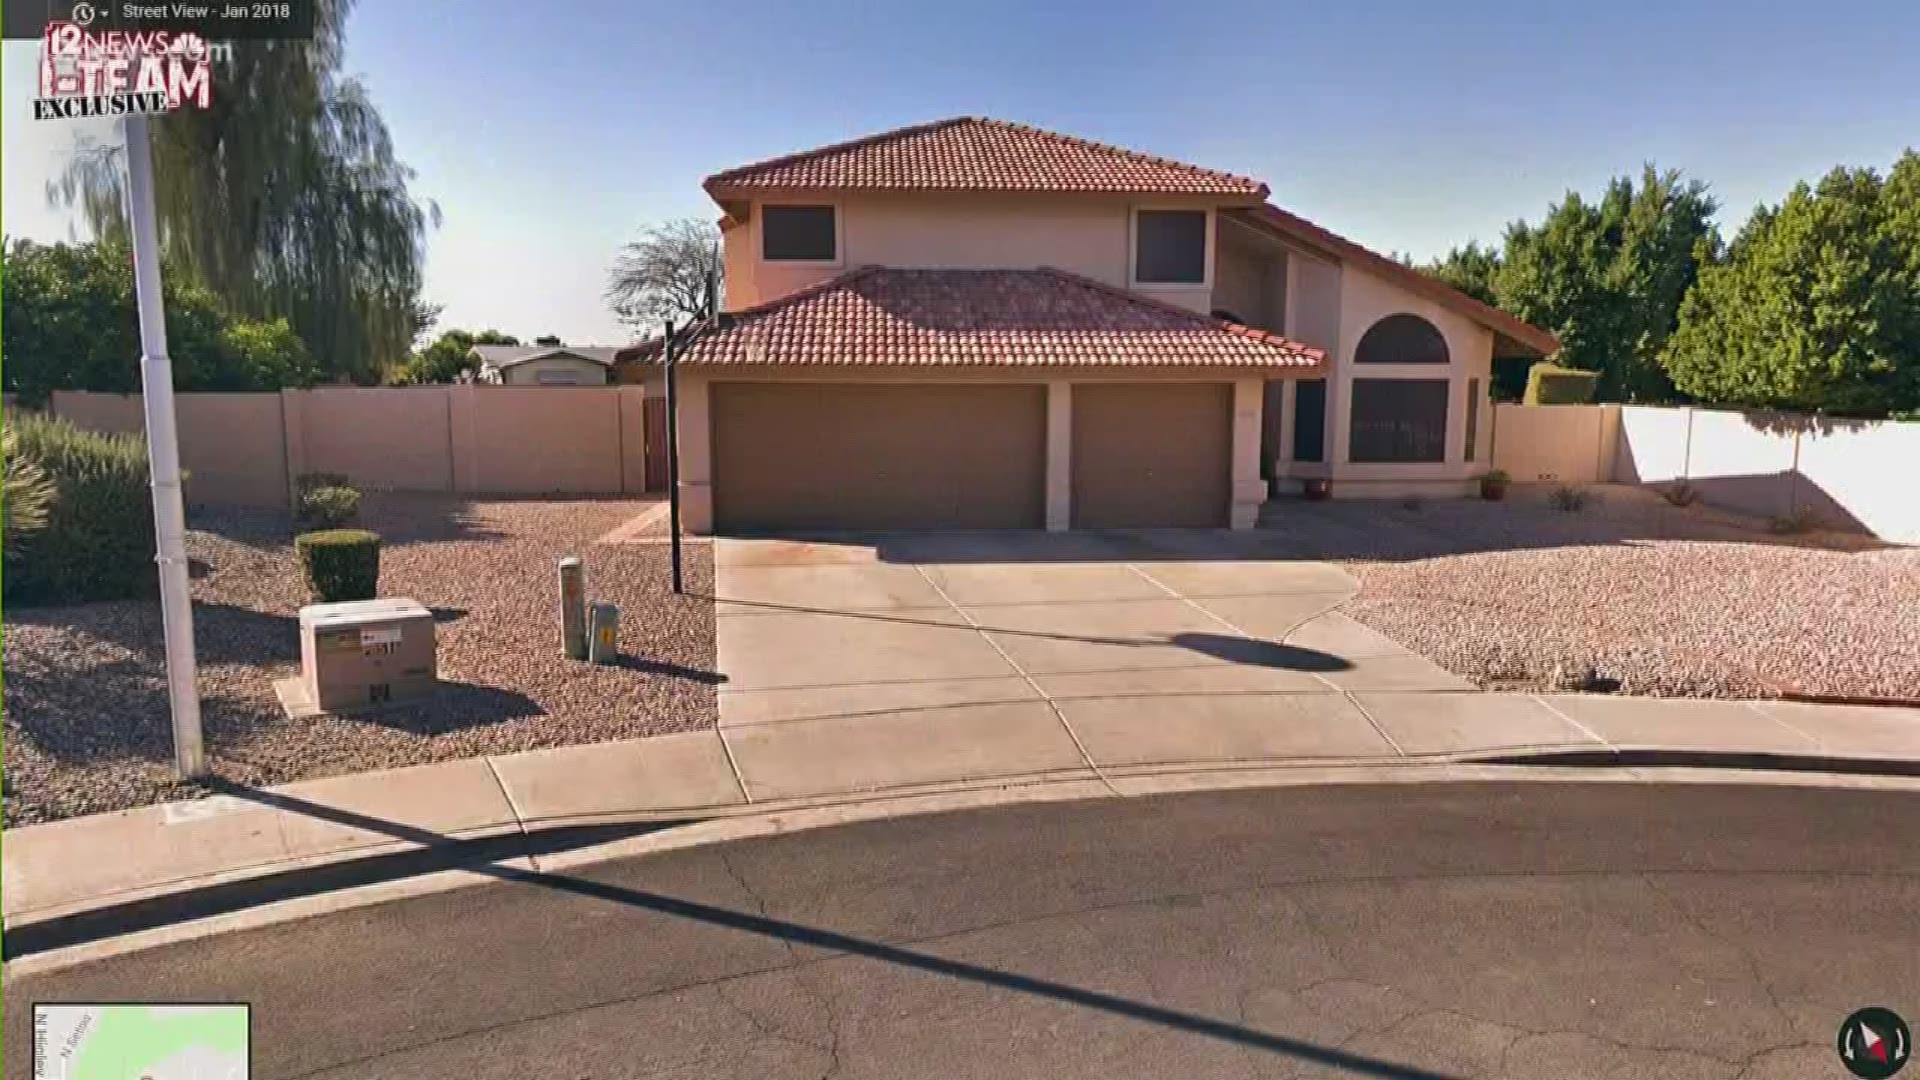 Usually, we hear about rental scams after someone's been scammed. But this time, 12 News and Mesa police were in it from the beginning -- attempting to scam the scammer.